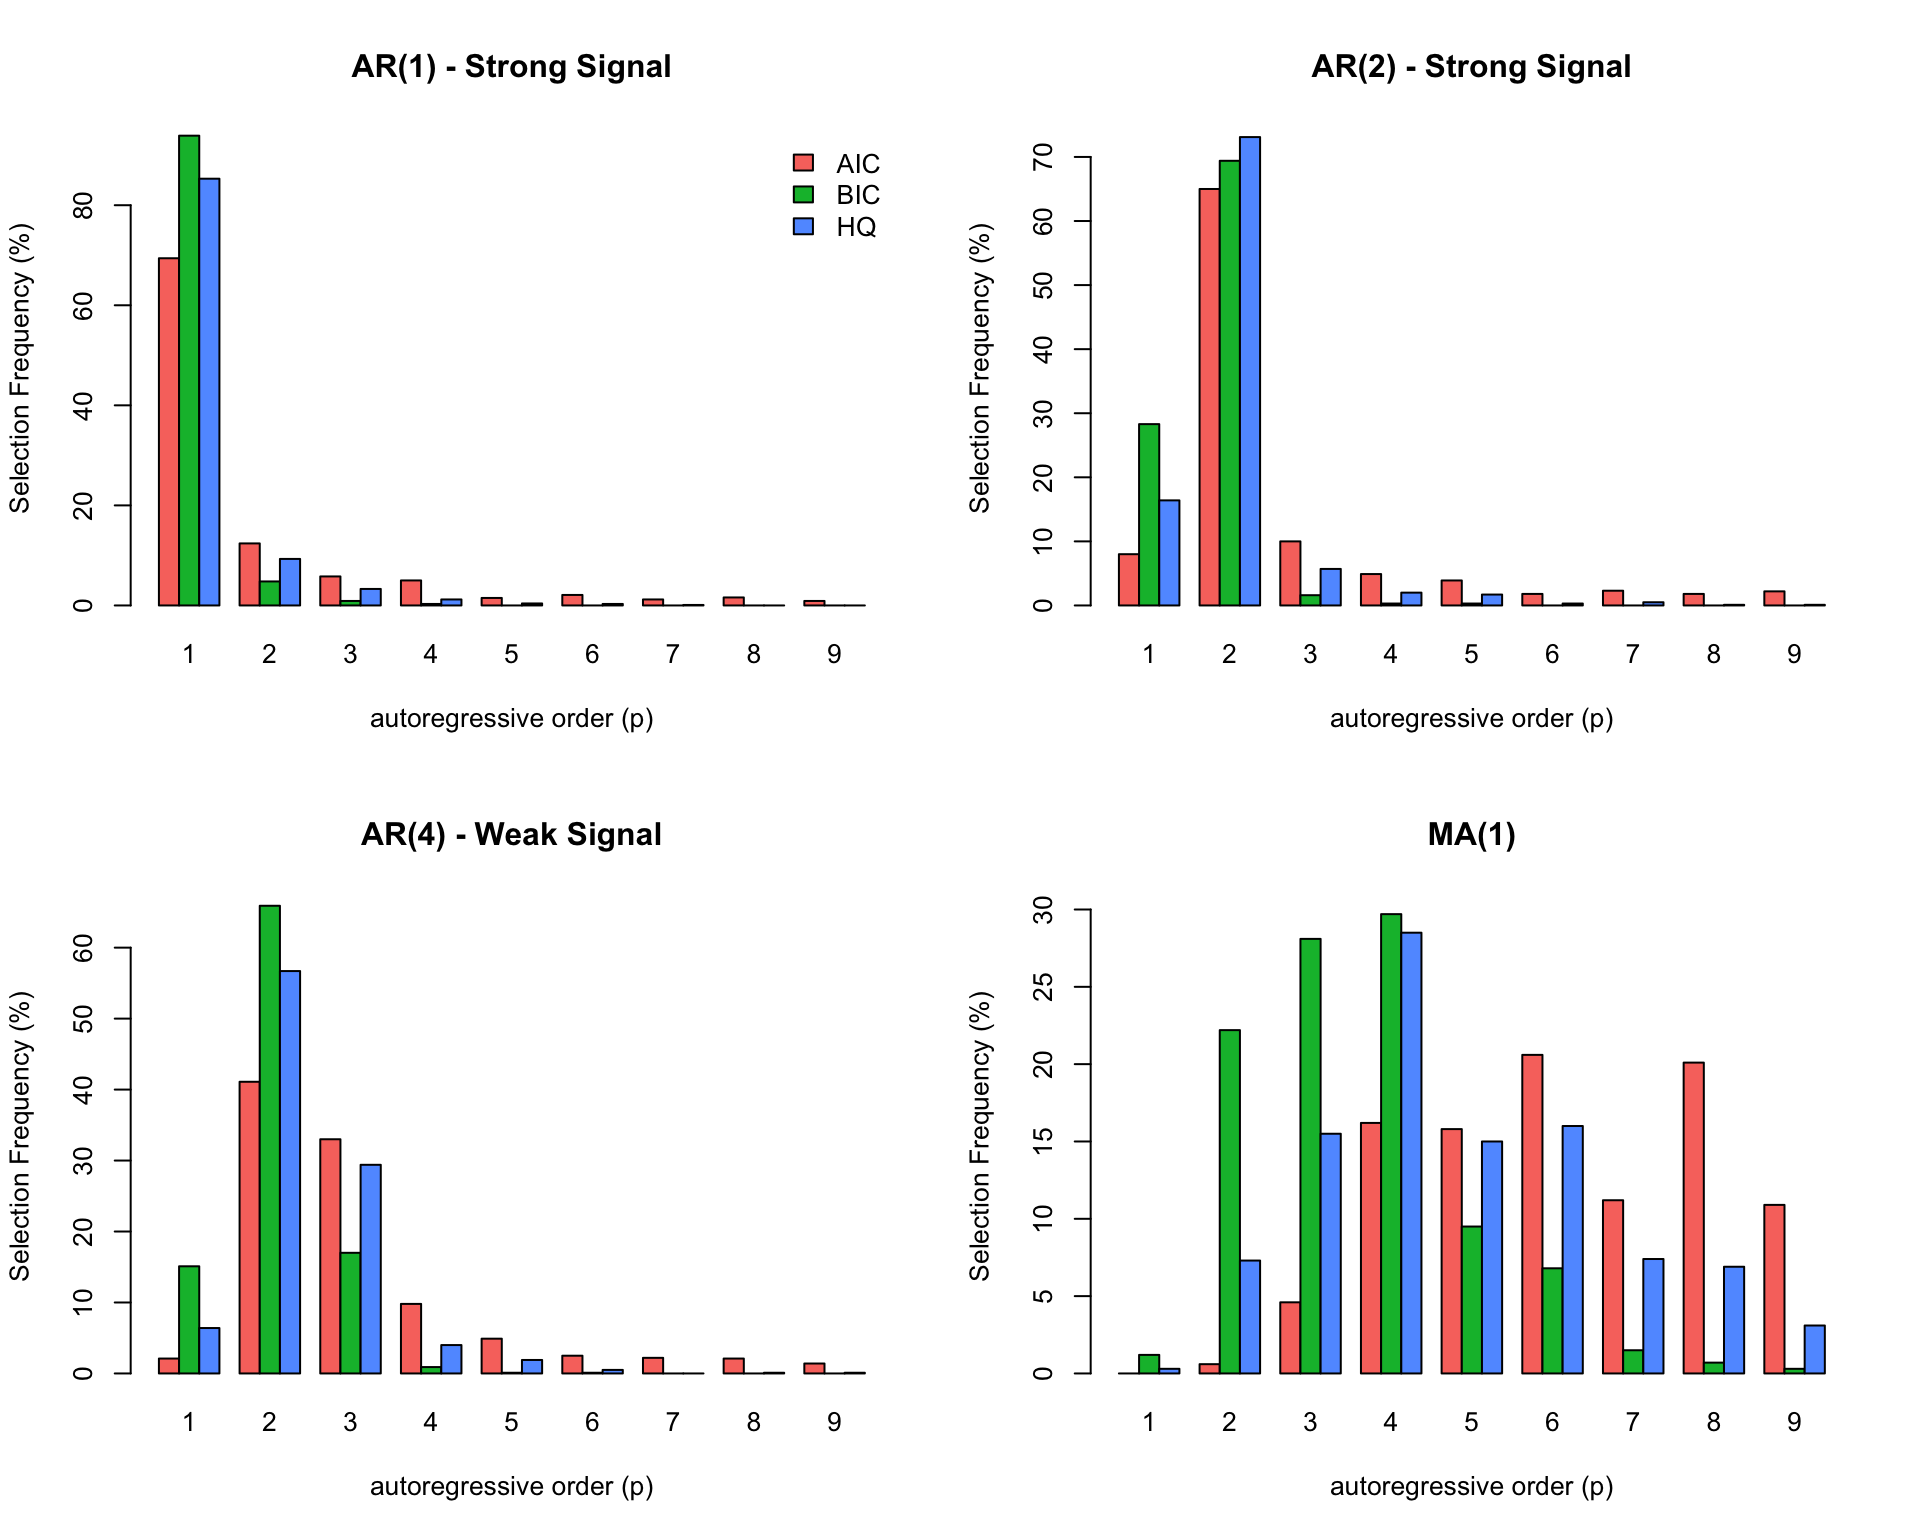 Barplots representing the frequency with which each considered model selection criterion (AIC, BIC, HQ) selects each of the possible candidate models within an AR(9) in each of the four simulation settings described in the text.